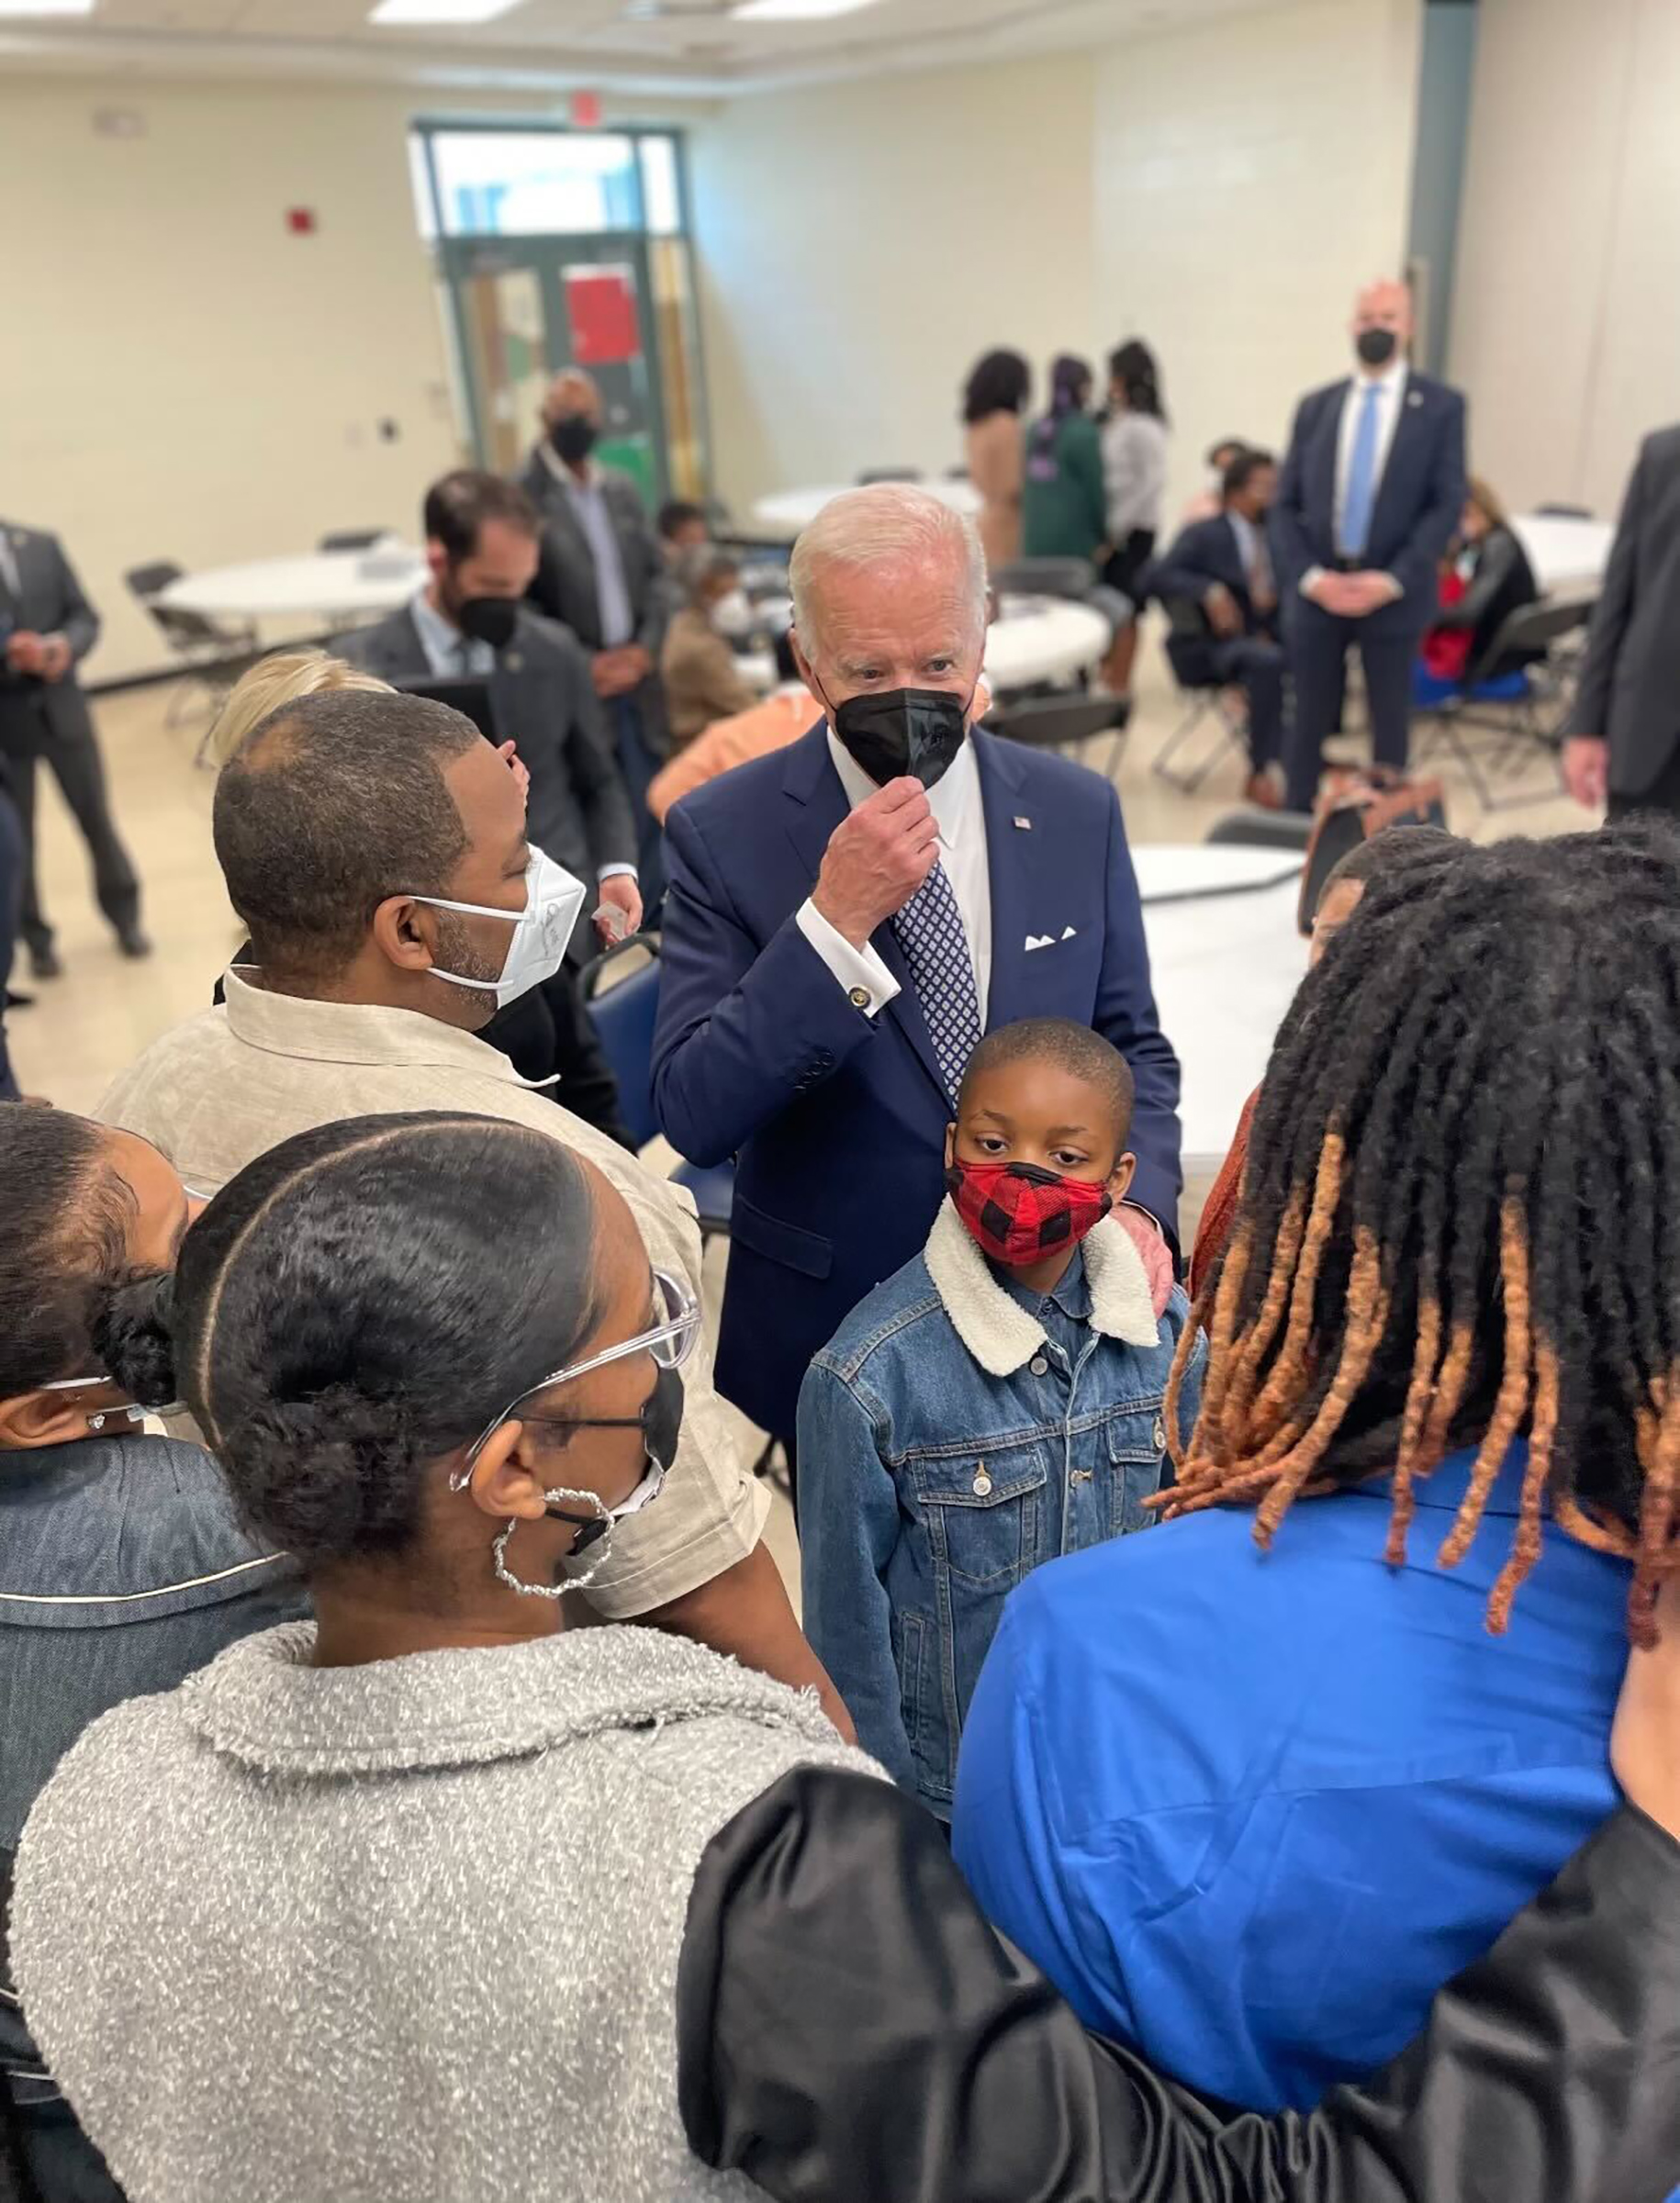 President Joe Biden meets with the family of Celestine Chaney in Buffalo, N.Y. on May 17. Chaney was one of the 10 people killed in the Tops supermarket shooting on May 14, 2022. (Courtesy Phillip Bell)